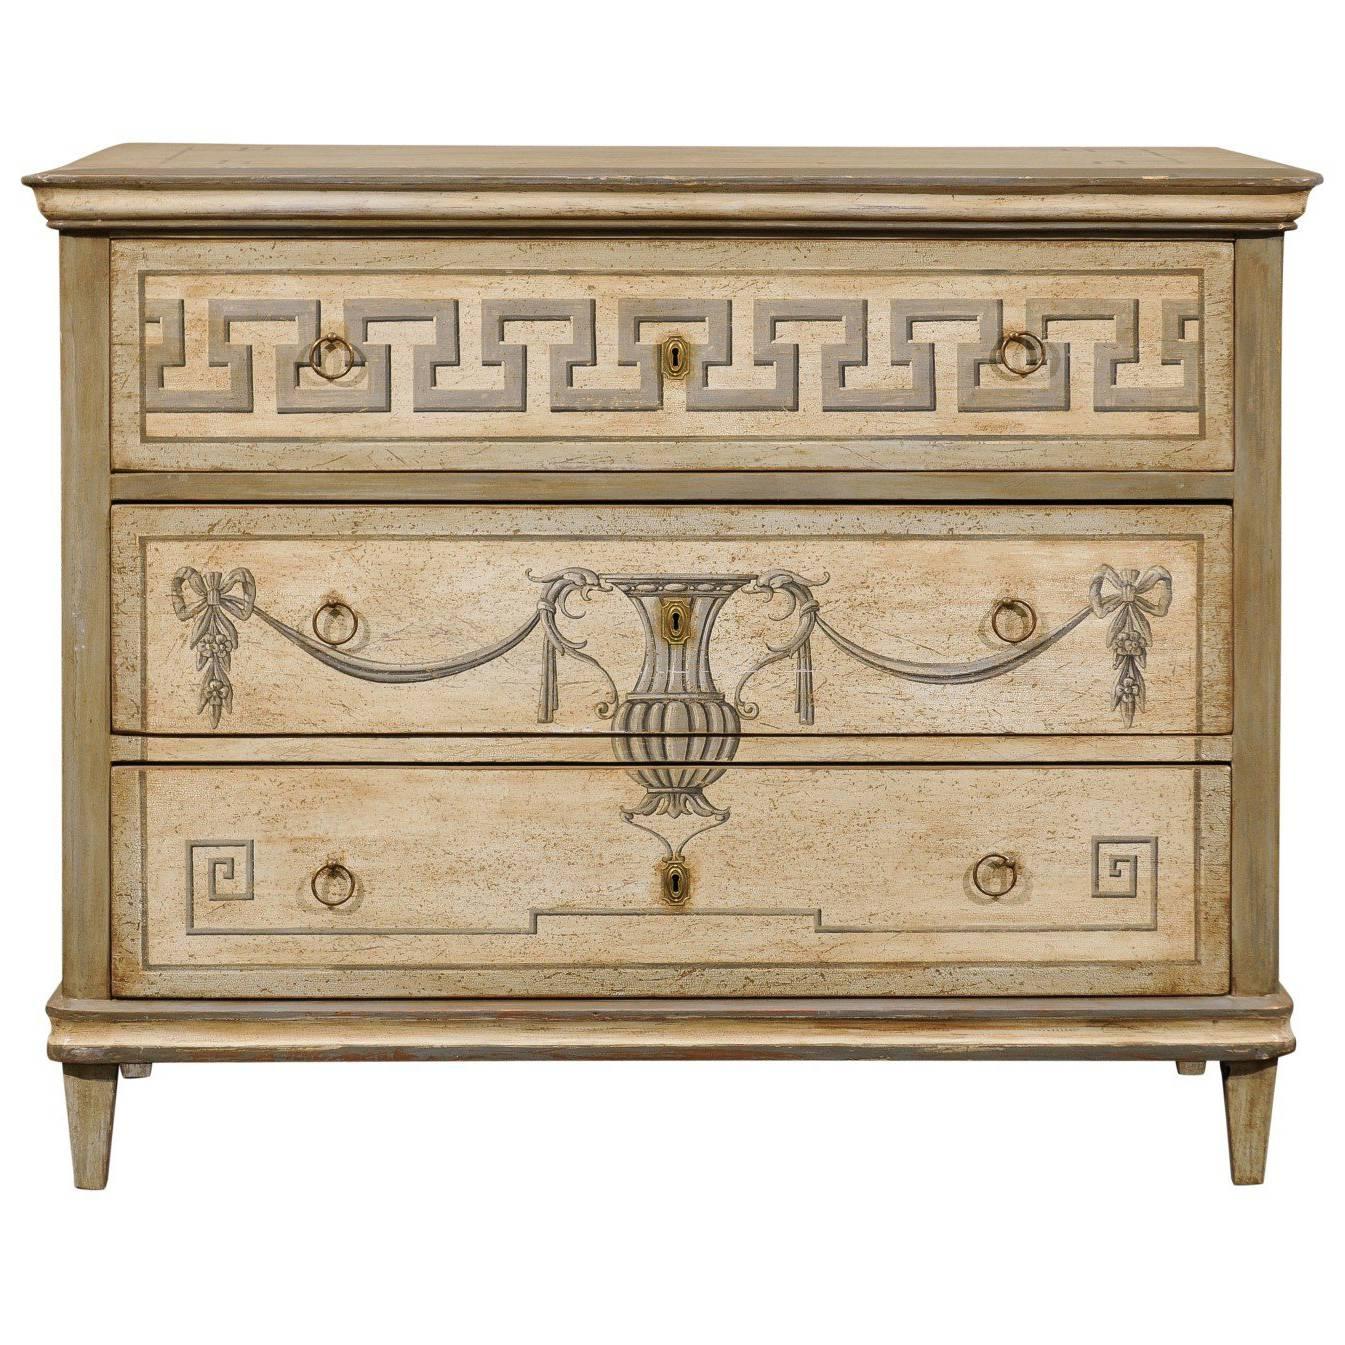 German, Mid-19th Century Neoclassical Style Painted Wood Commode with Greek Key